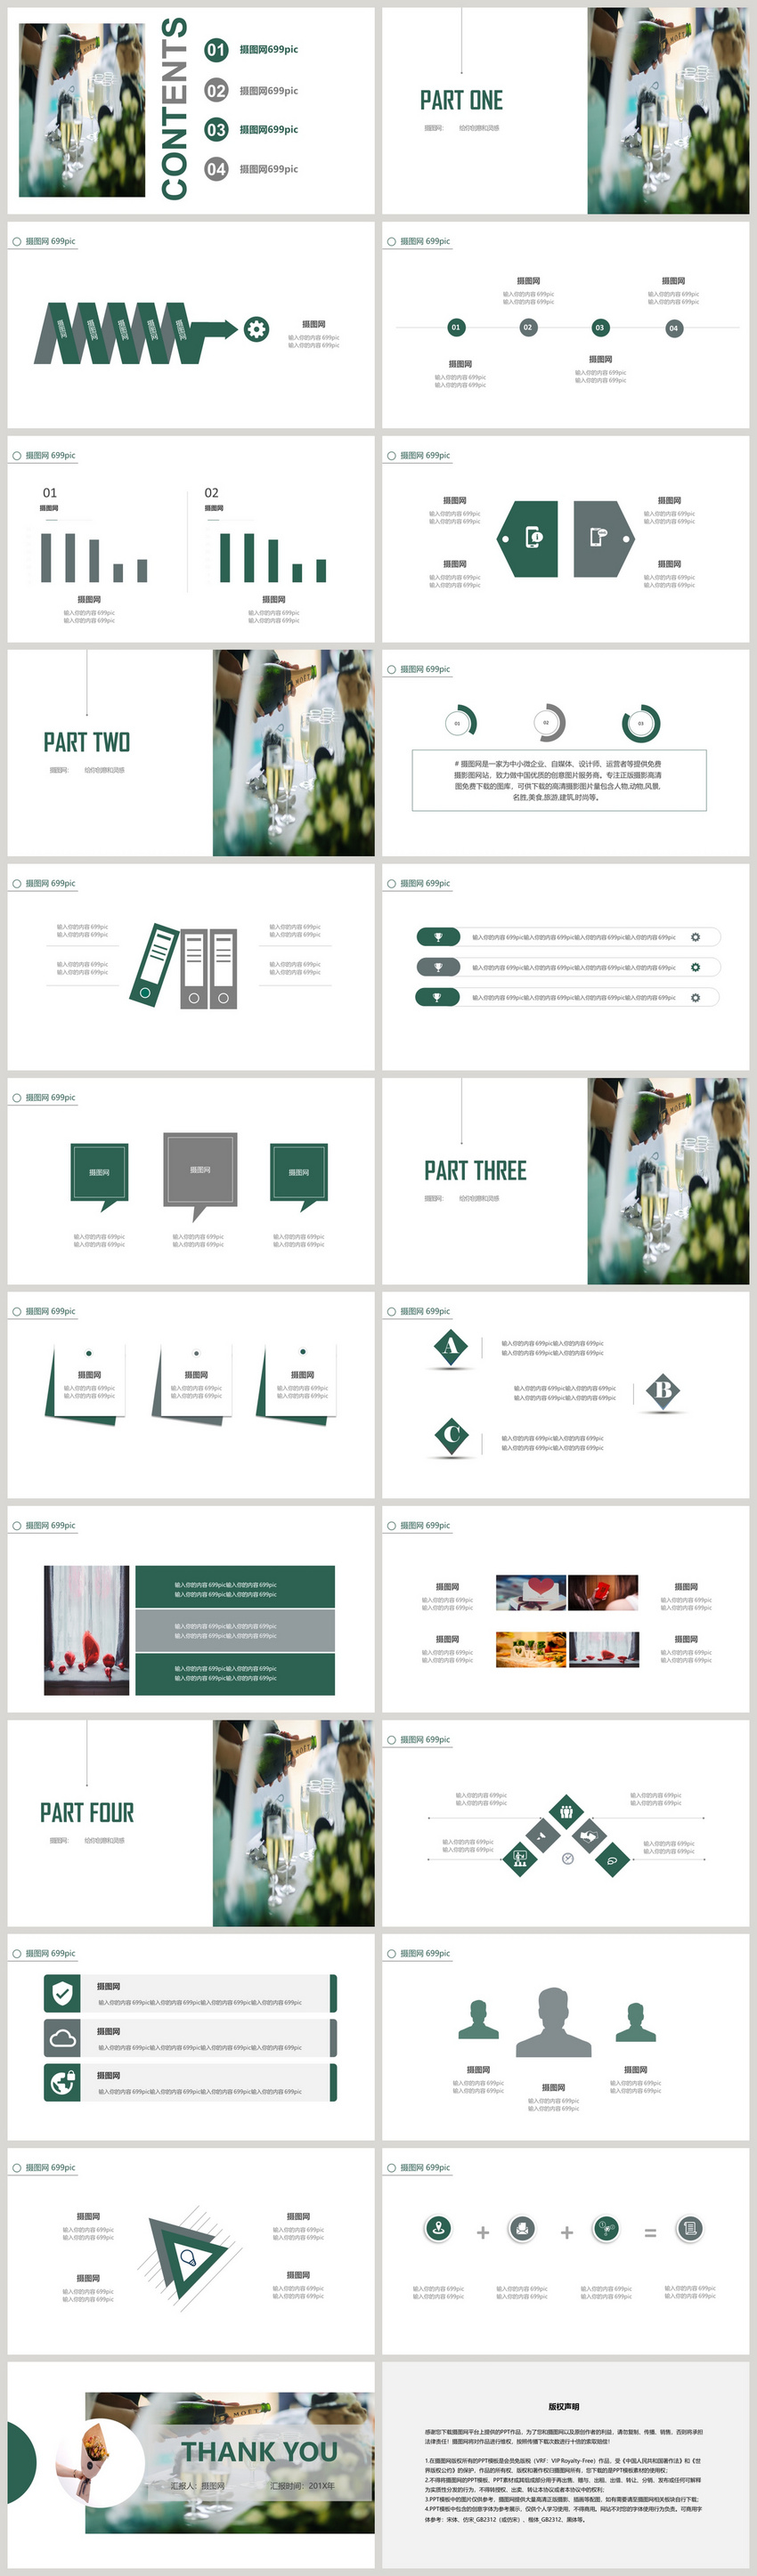 Wedding Company Activities Planning Ppt Template Powerpoint Templete Ppt Free Download Lovepik Com